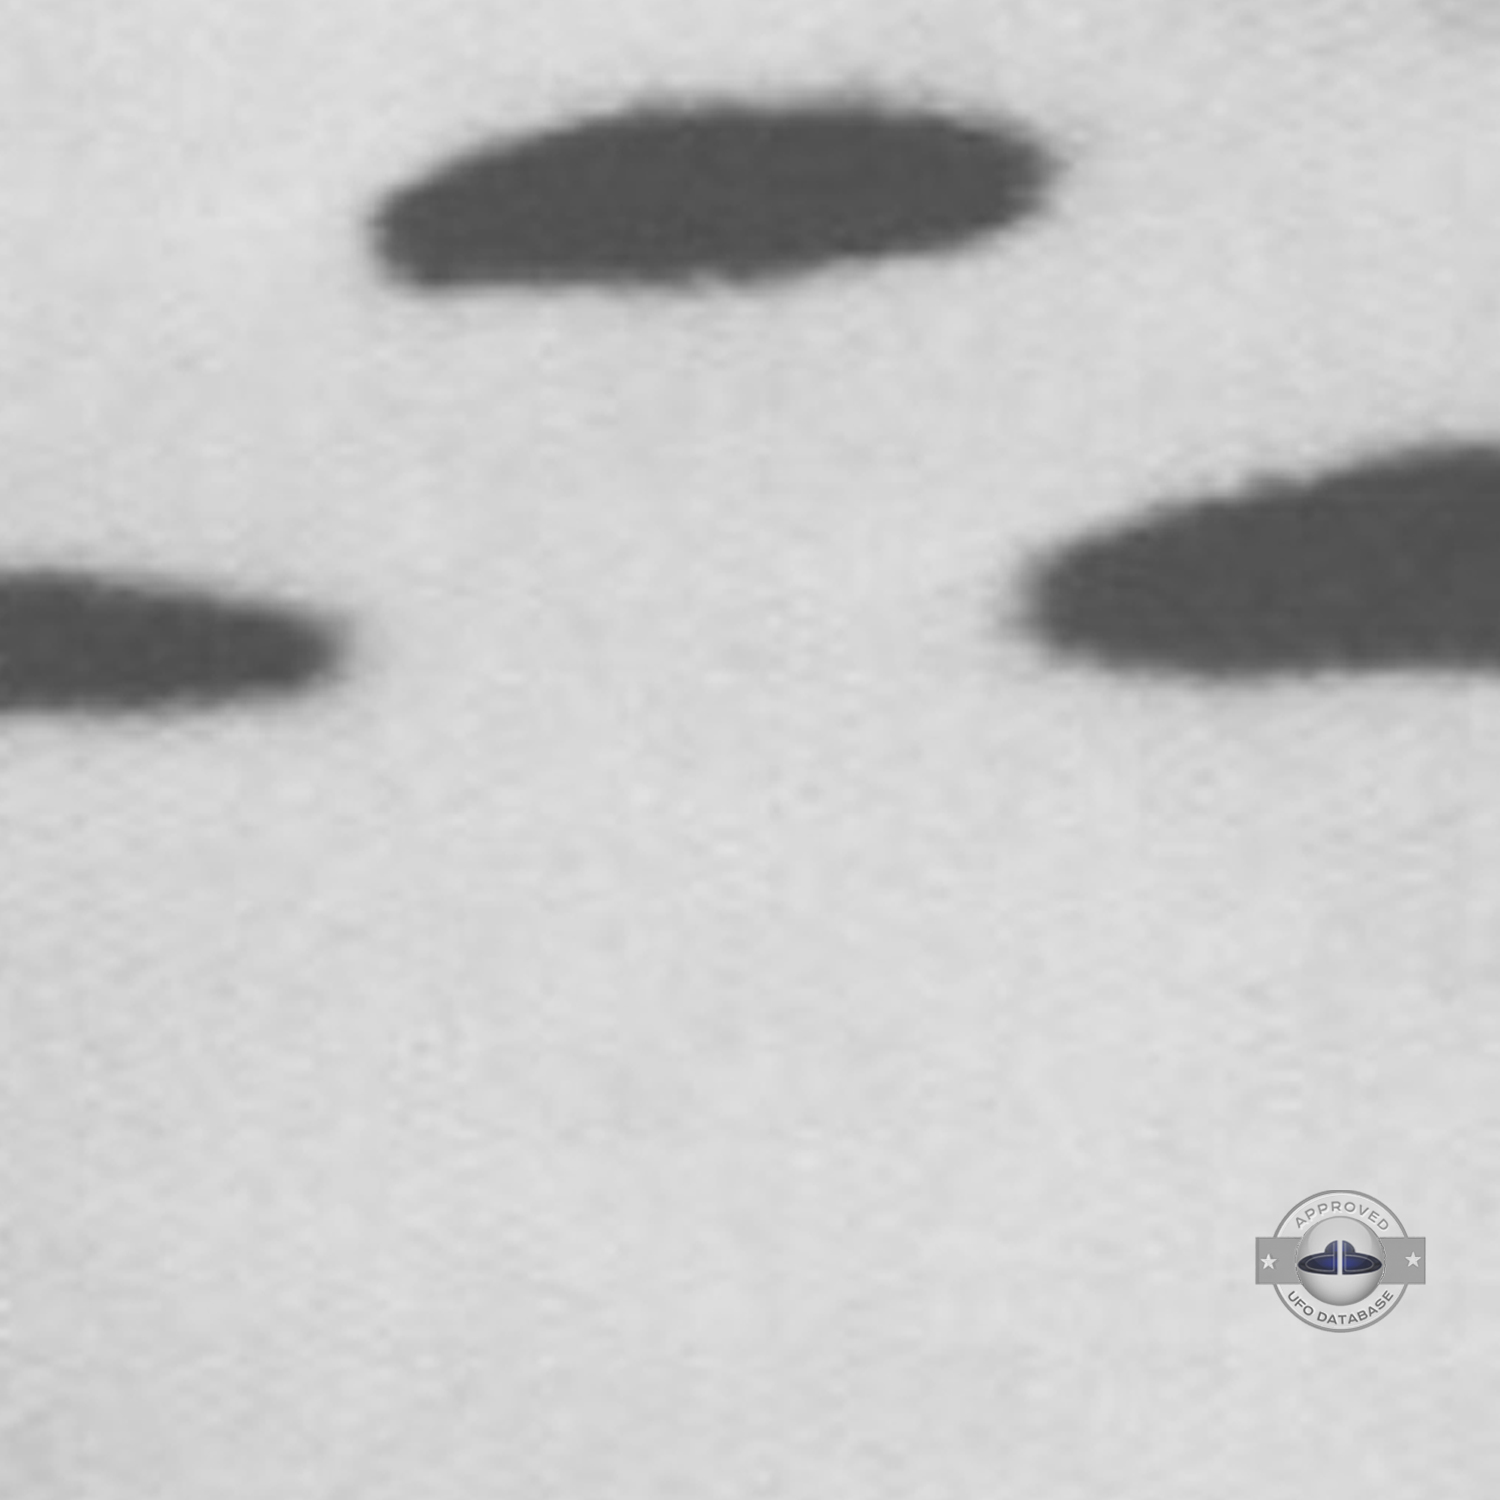 3 dark saucer shape UFOs near church in cathedral square of Sicuani UFO Picture #131-5